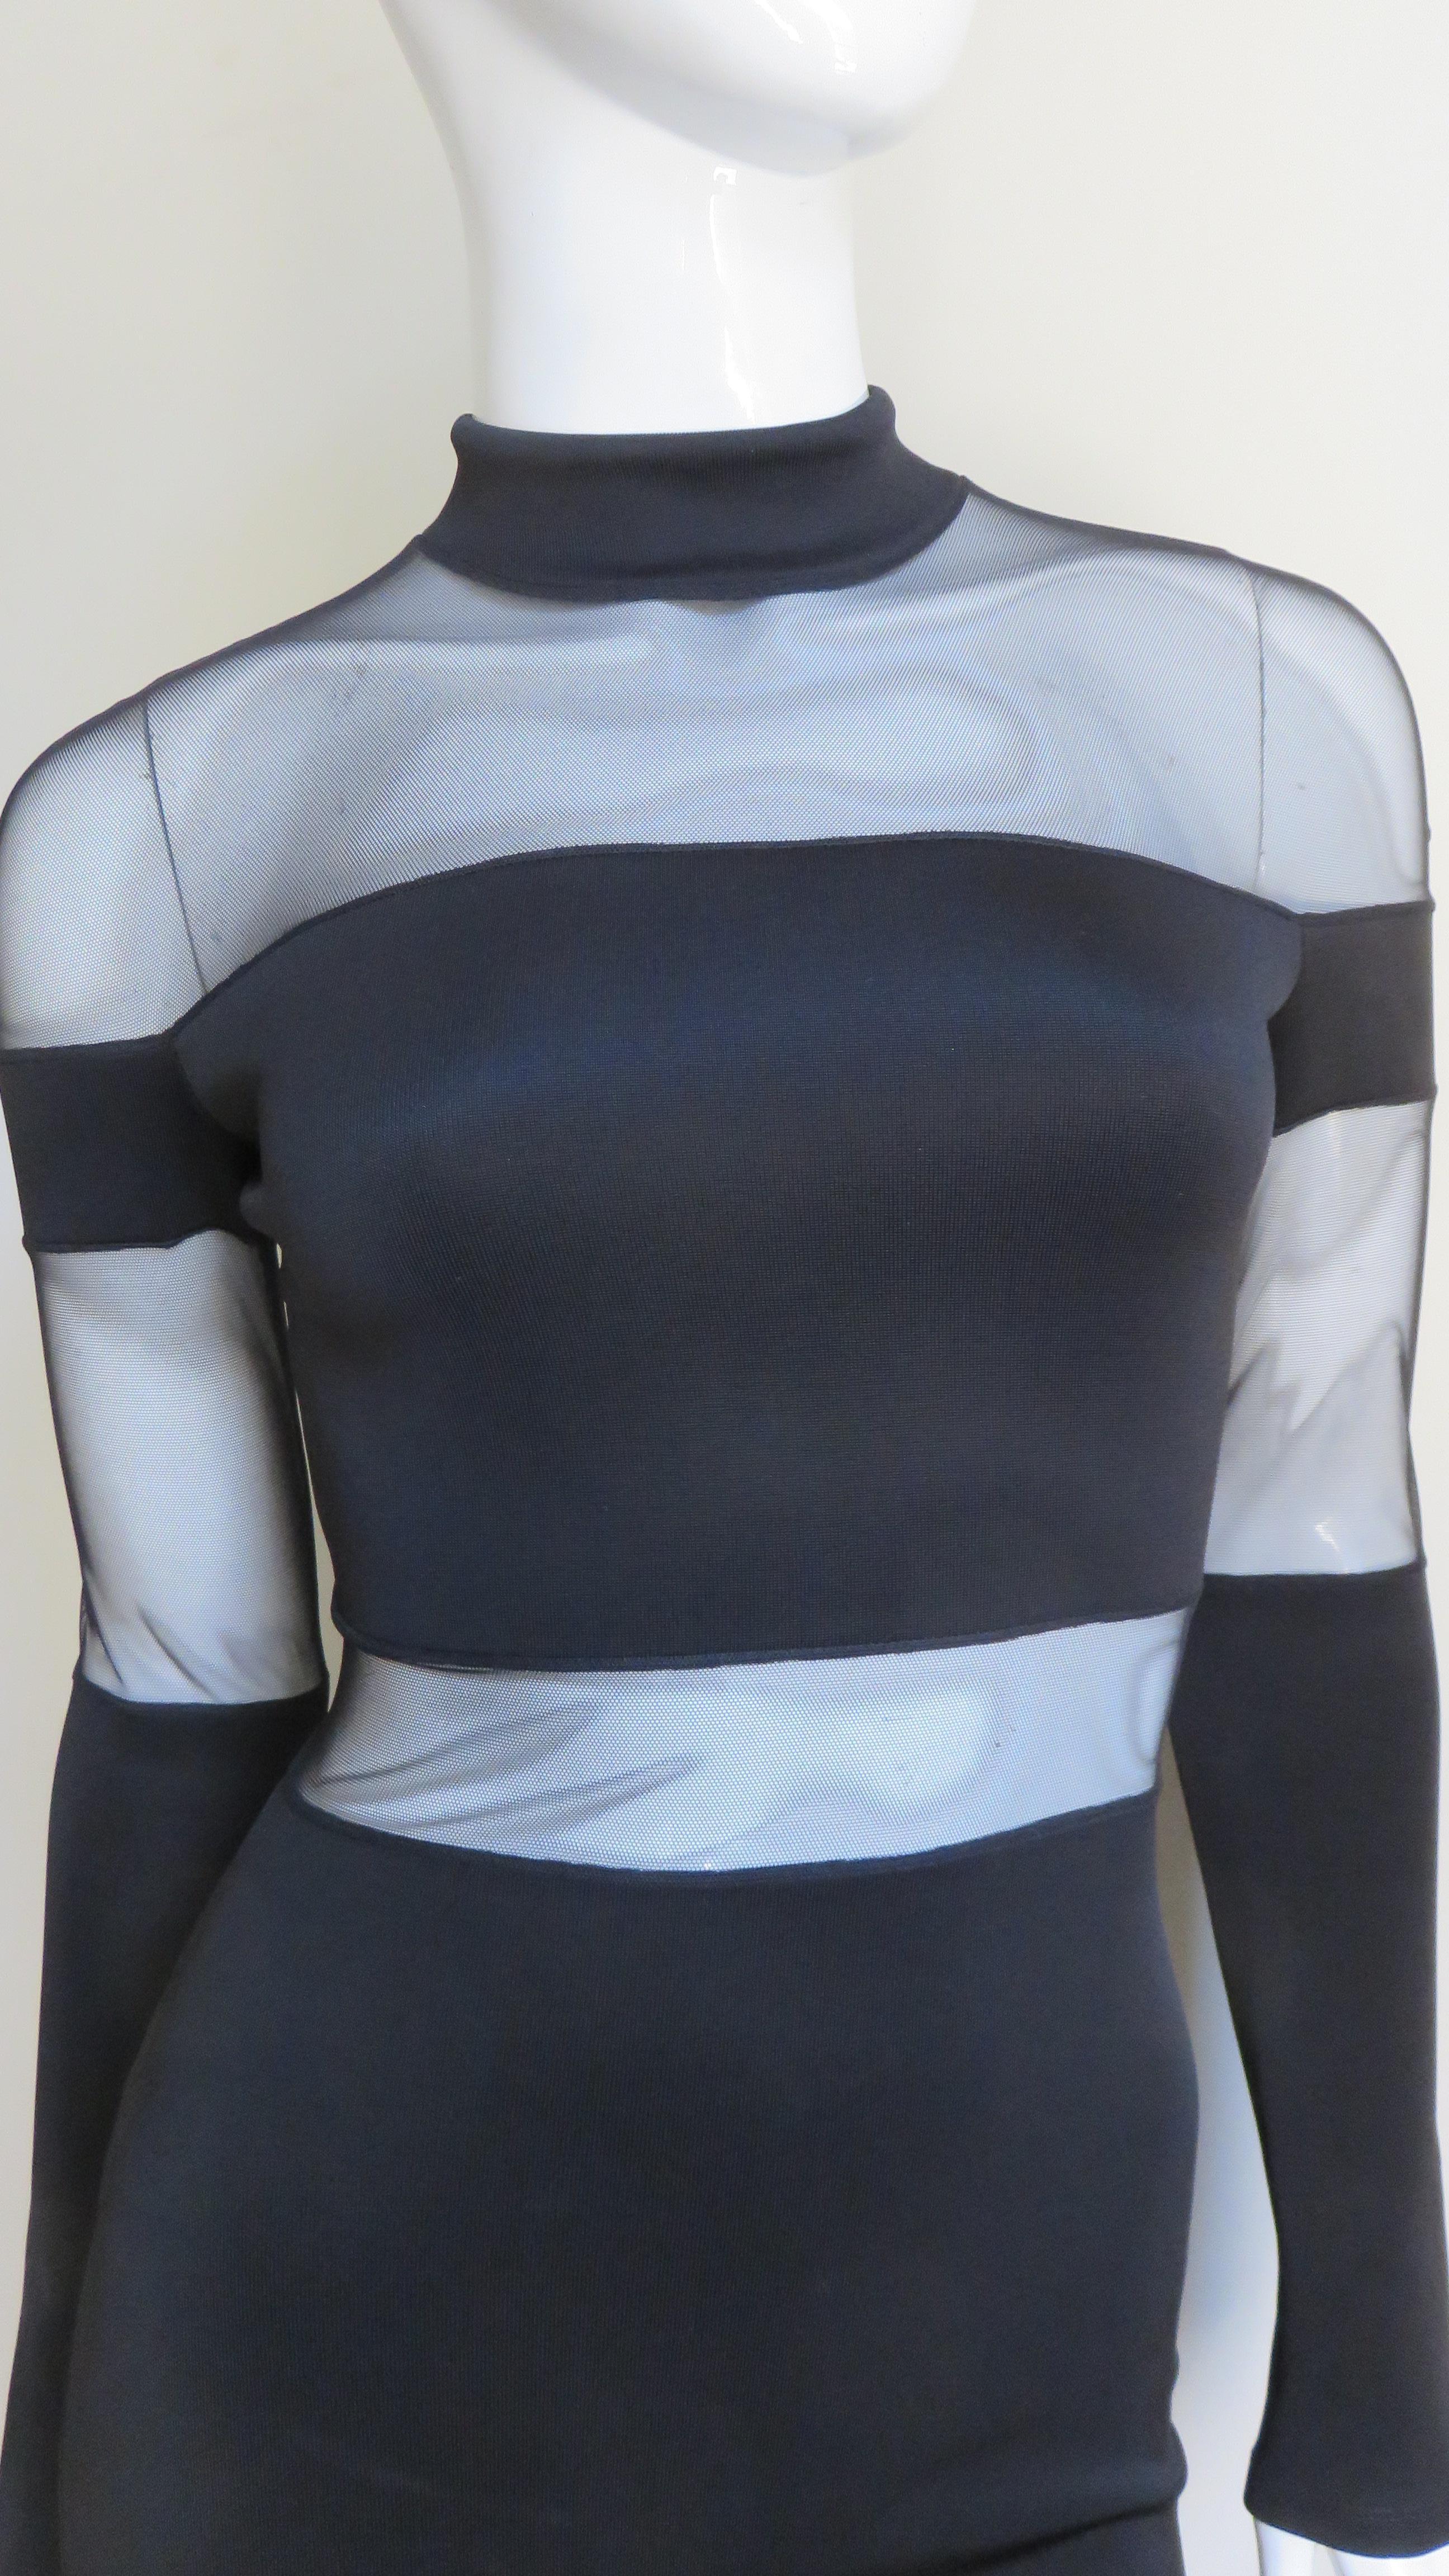 Black Pierre Balmain Bodycon Dress with Sheer Shoulders and Waist For Sale